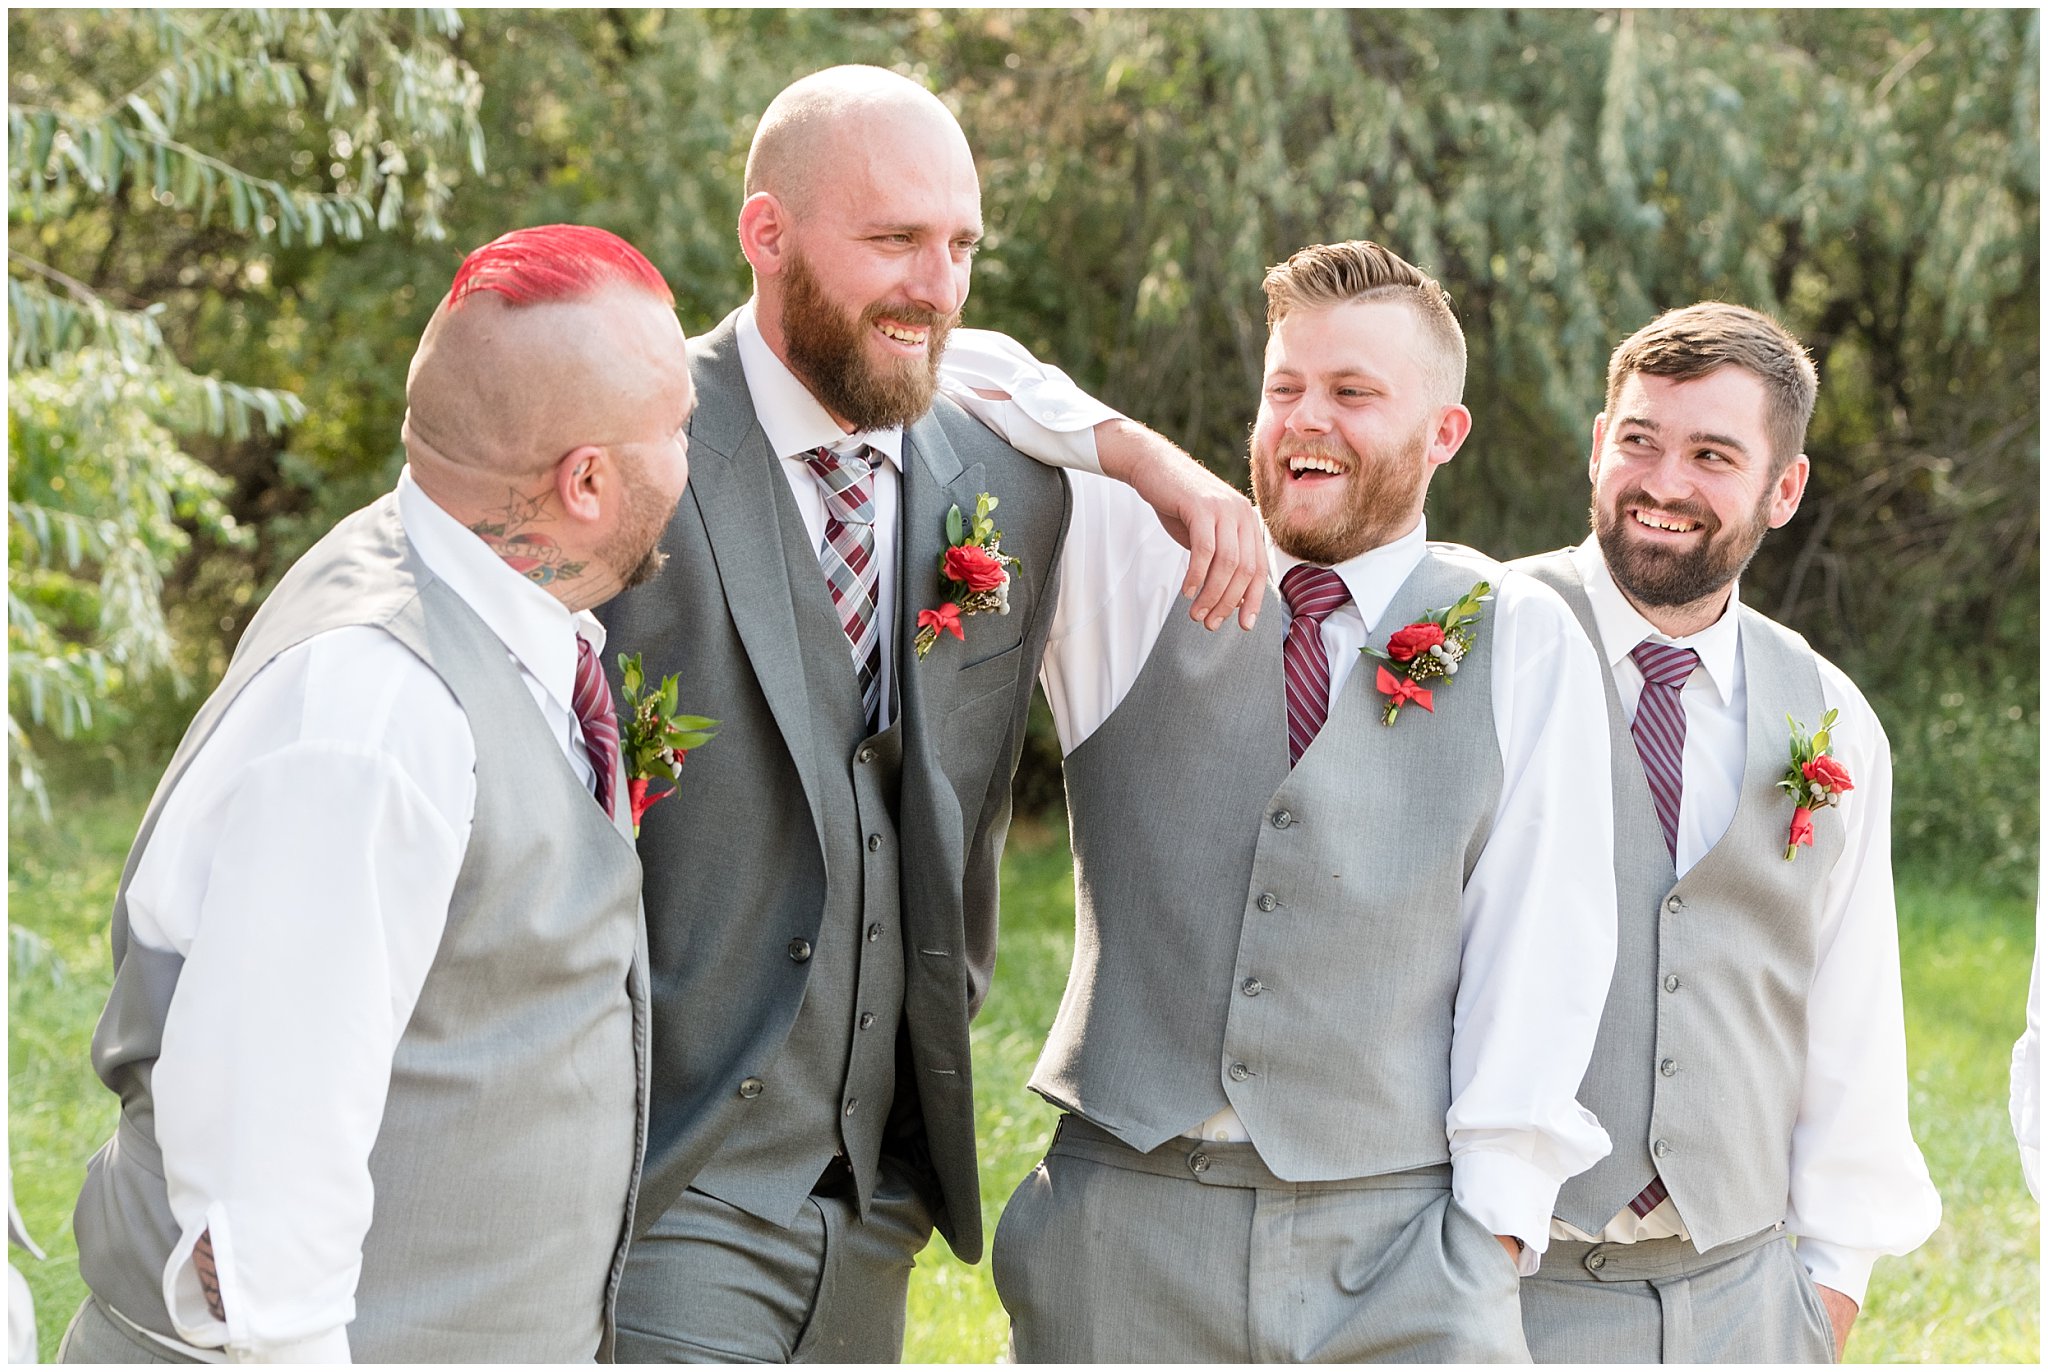 Groom and groomsmen in grey suits walking and joking | Davis County Outdoor Wedding | Jessie and Dallin Photography